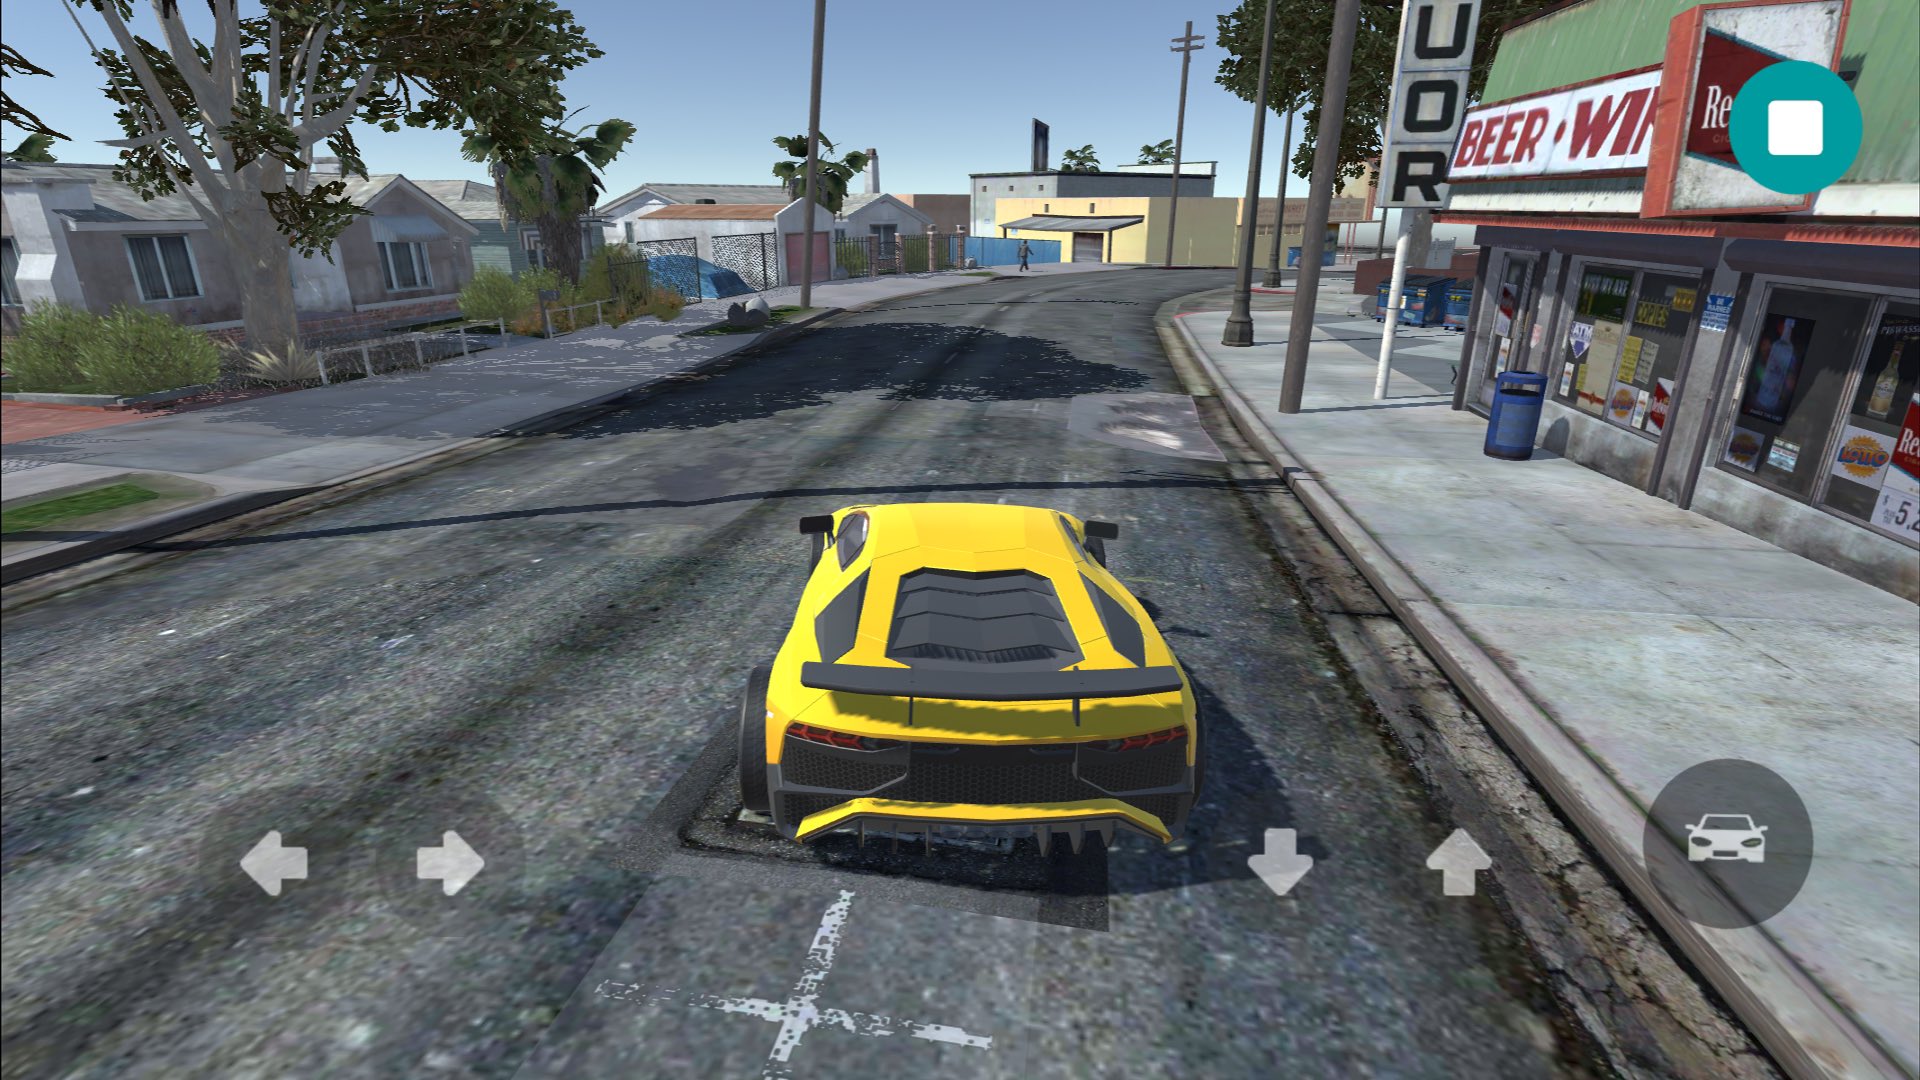 Ben Geskin on X: GTA V Mobile 😄👌🏻 Android APK here:    / X